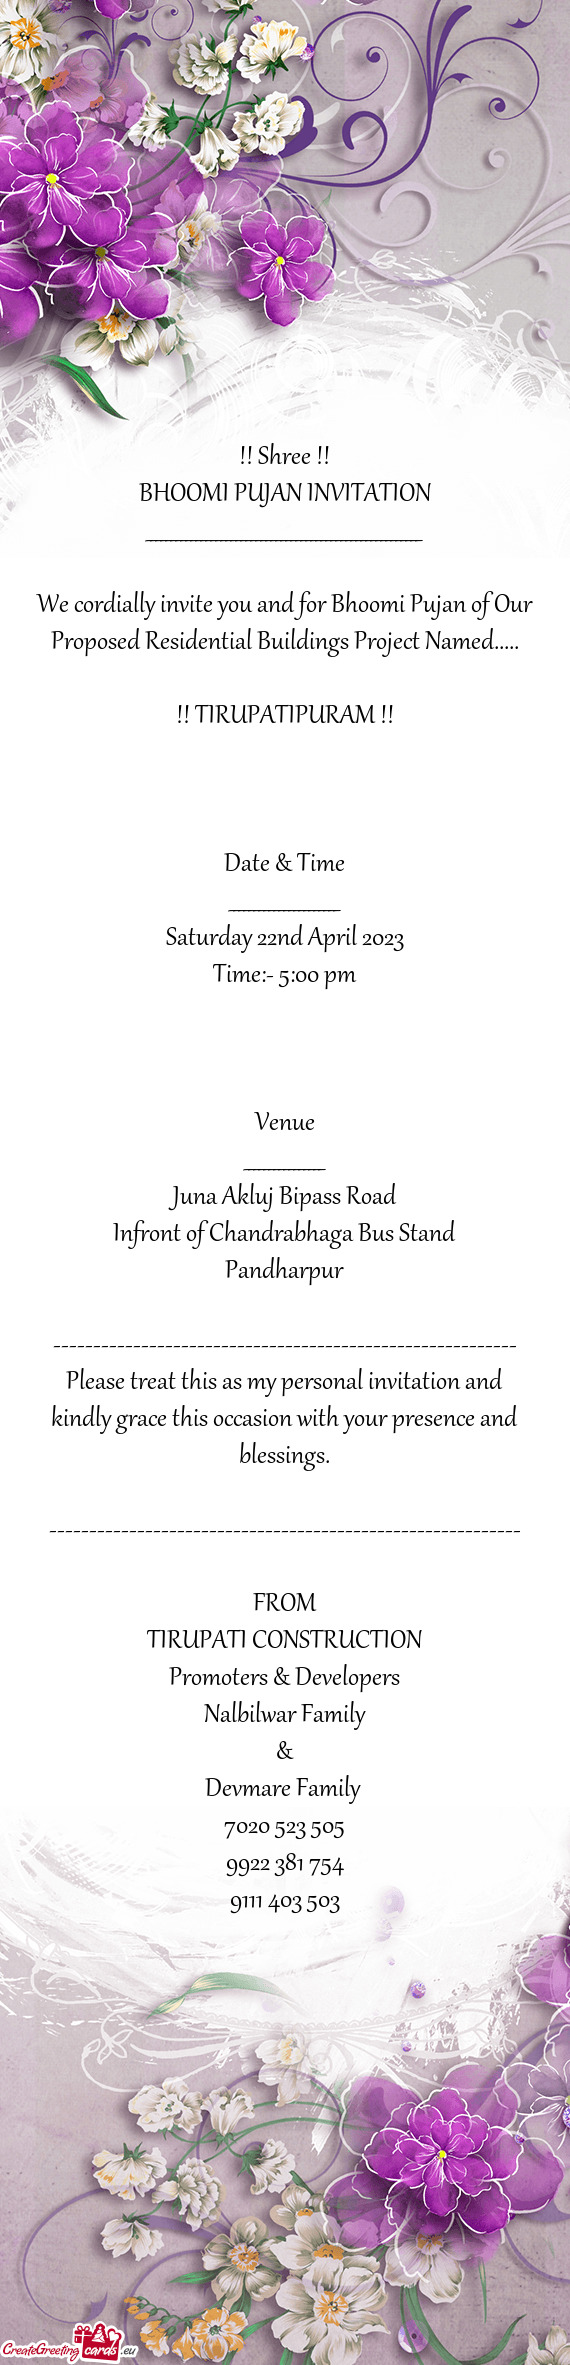 We cordially invite you and for Bhoomi Pujan of Our Proposed Residential Buildings Project Named